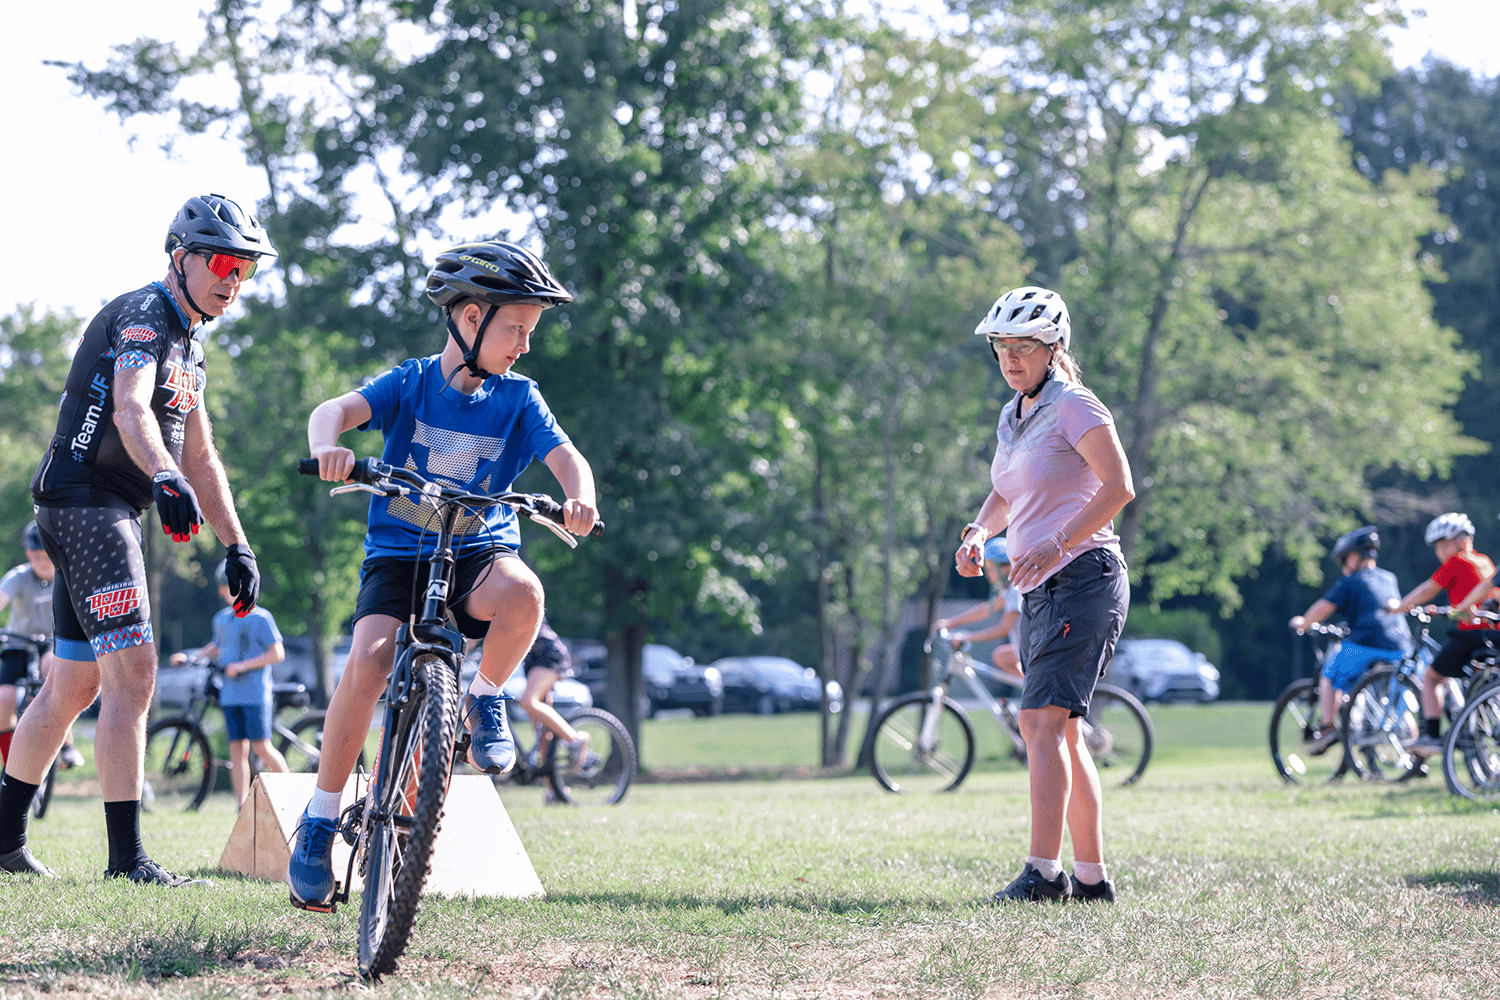 alt=Photo of young boy riding a bike while adult leaders watch him